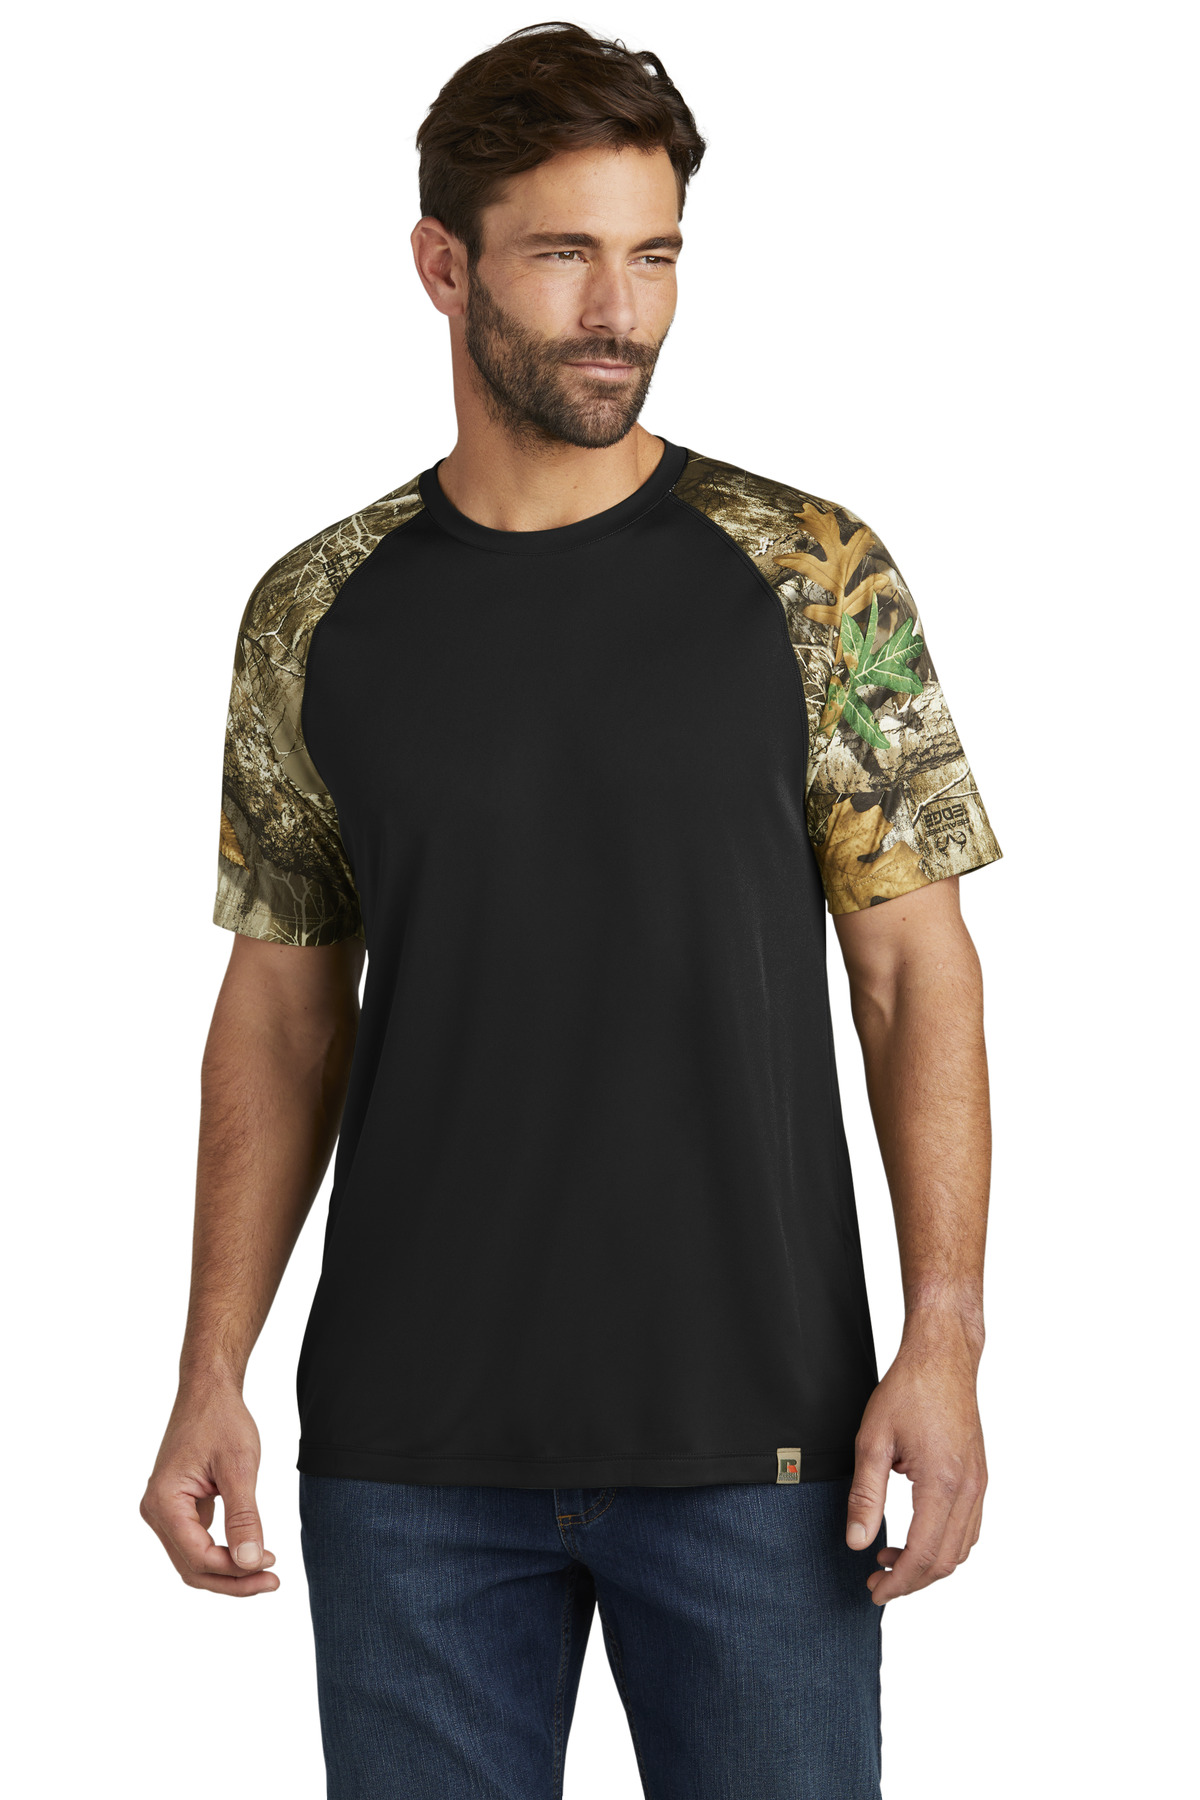 Russell Outdoors Realtree Colorblock Performance Tee-Russell Outdoors